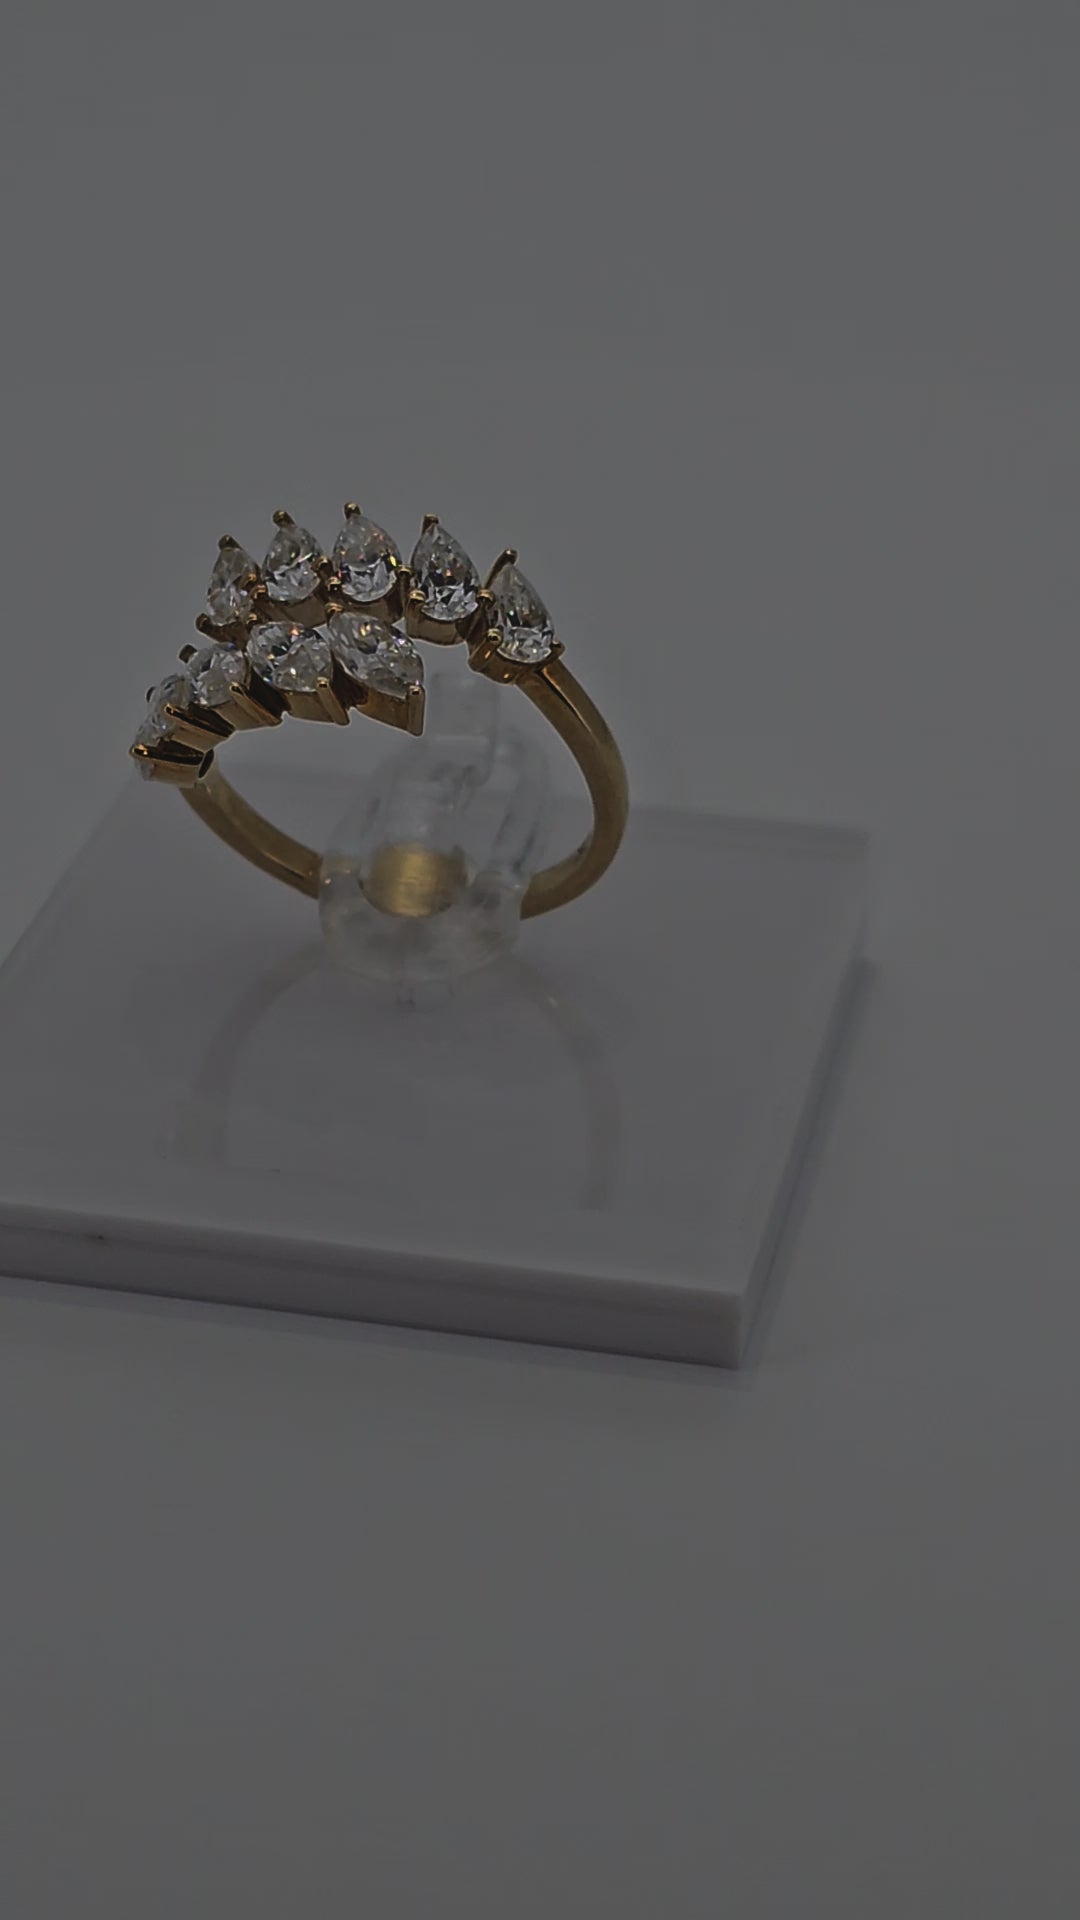 Video of Marquise Pear Diamond Solid Gold Designer Luxury Ring fro Boujee Ice